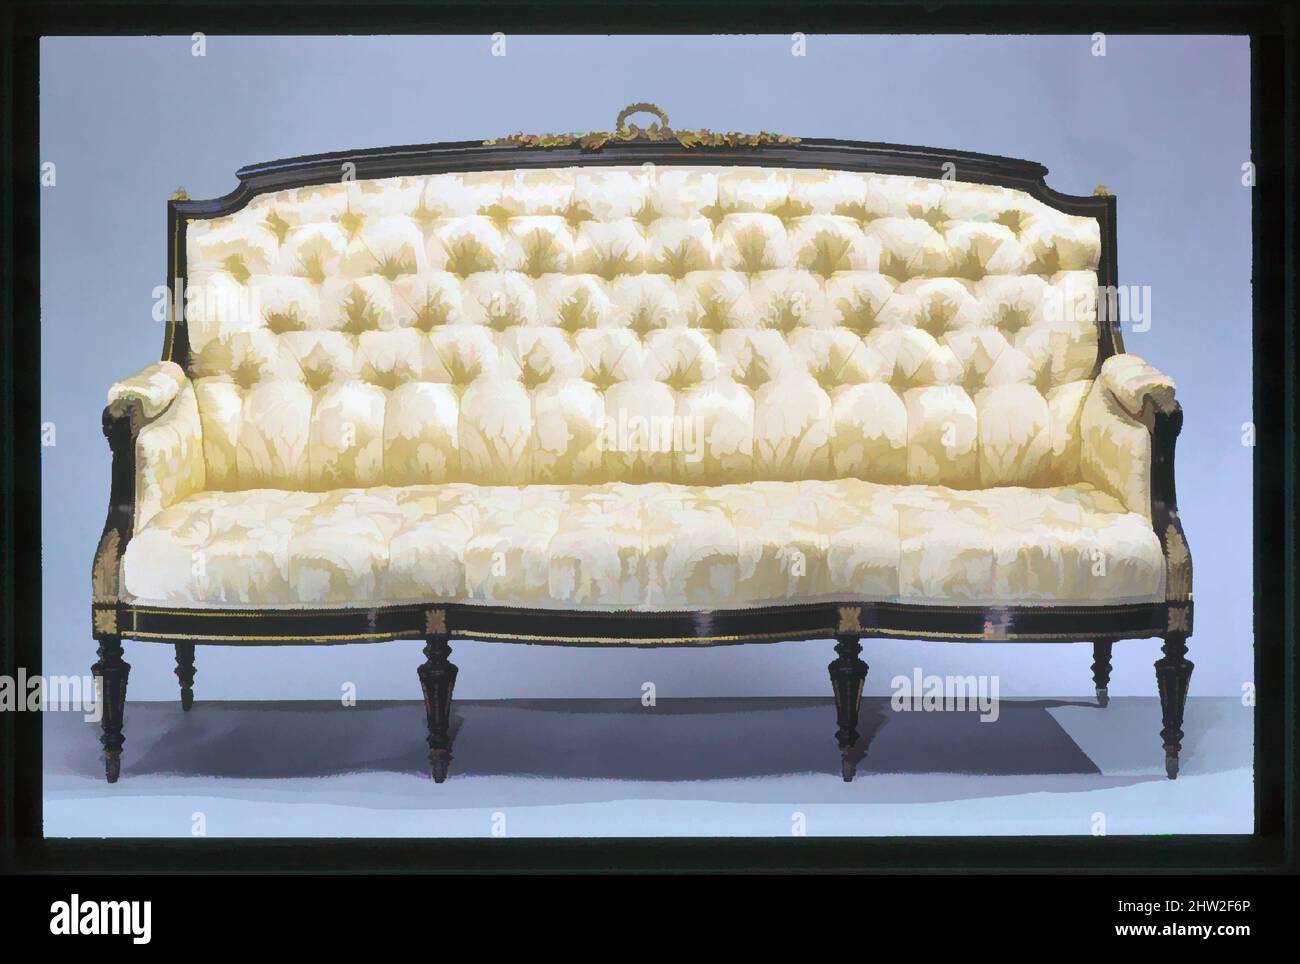 Art inspired by Sofa, ca. 1860, Made in New York, New York, United States, American, Maple, gilt bronze, 42 1/2 x 73 x 34 1/2 in. (108 x 185.4 x 87.6 cm), Furniture, Léon Marcotte (1824–1887), This sofa is part of a suite of Louis XVI–style furniture that John Taylor Johnston (1820–, Classic works modernized by Artotop with a splash of modernity. Shapes, color and value, eye-catching visual impact on art. Emotions through freedom of artworks in a contemporary way. A timeless message pursuing a wildly creative new direction. Artists turning to the digital medium and creating the Artotop NFT Stock Photo